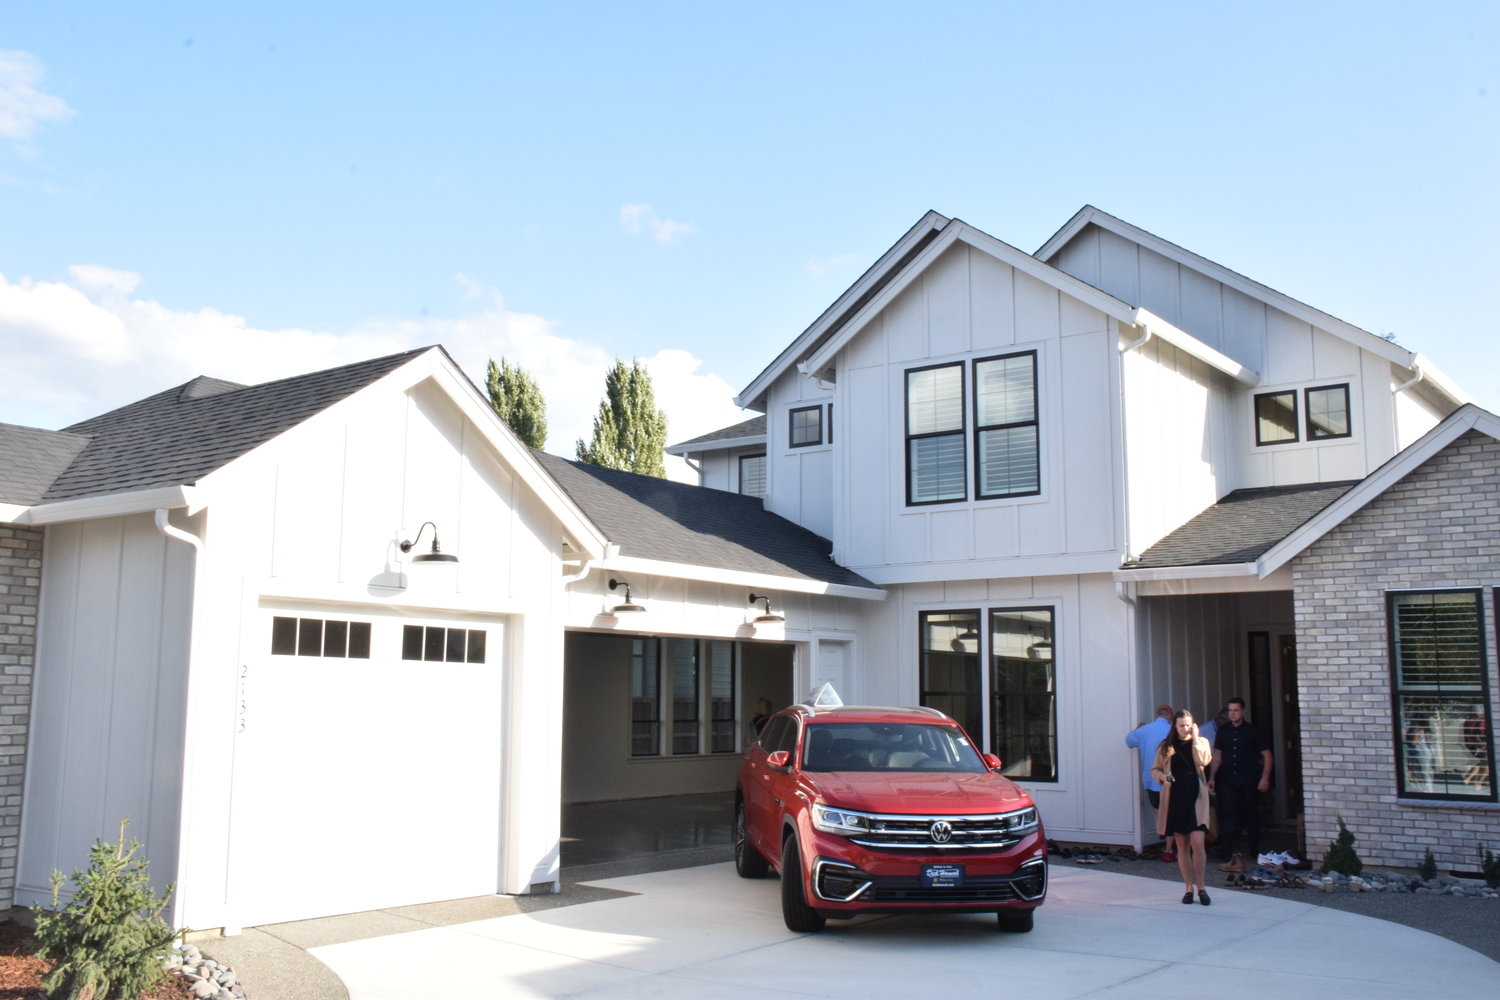 “The Haven,” one of six homes featured at this year’s Parade of Homes, is toured by attendees of the event.